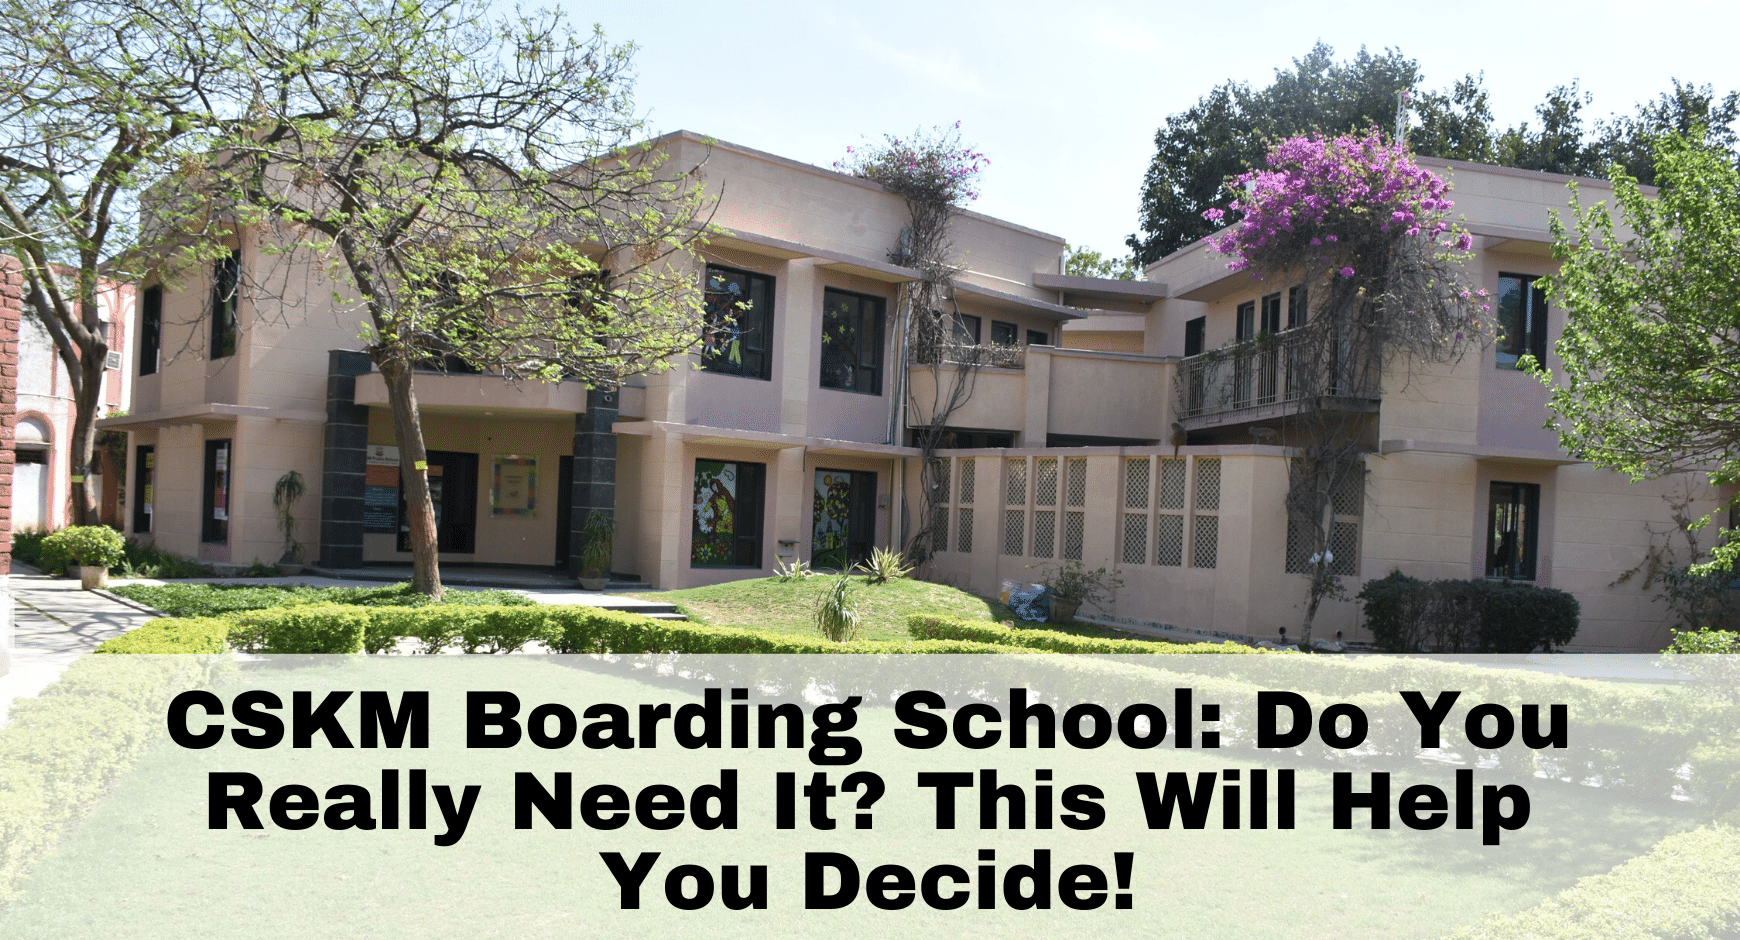 CSKM boarding school: Do You Really Need It? This Will Help You Decide!